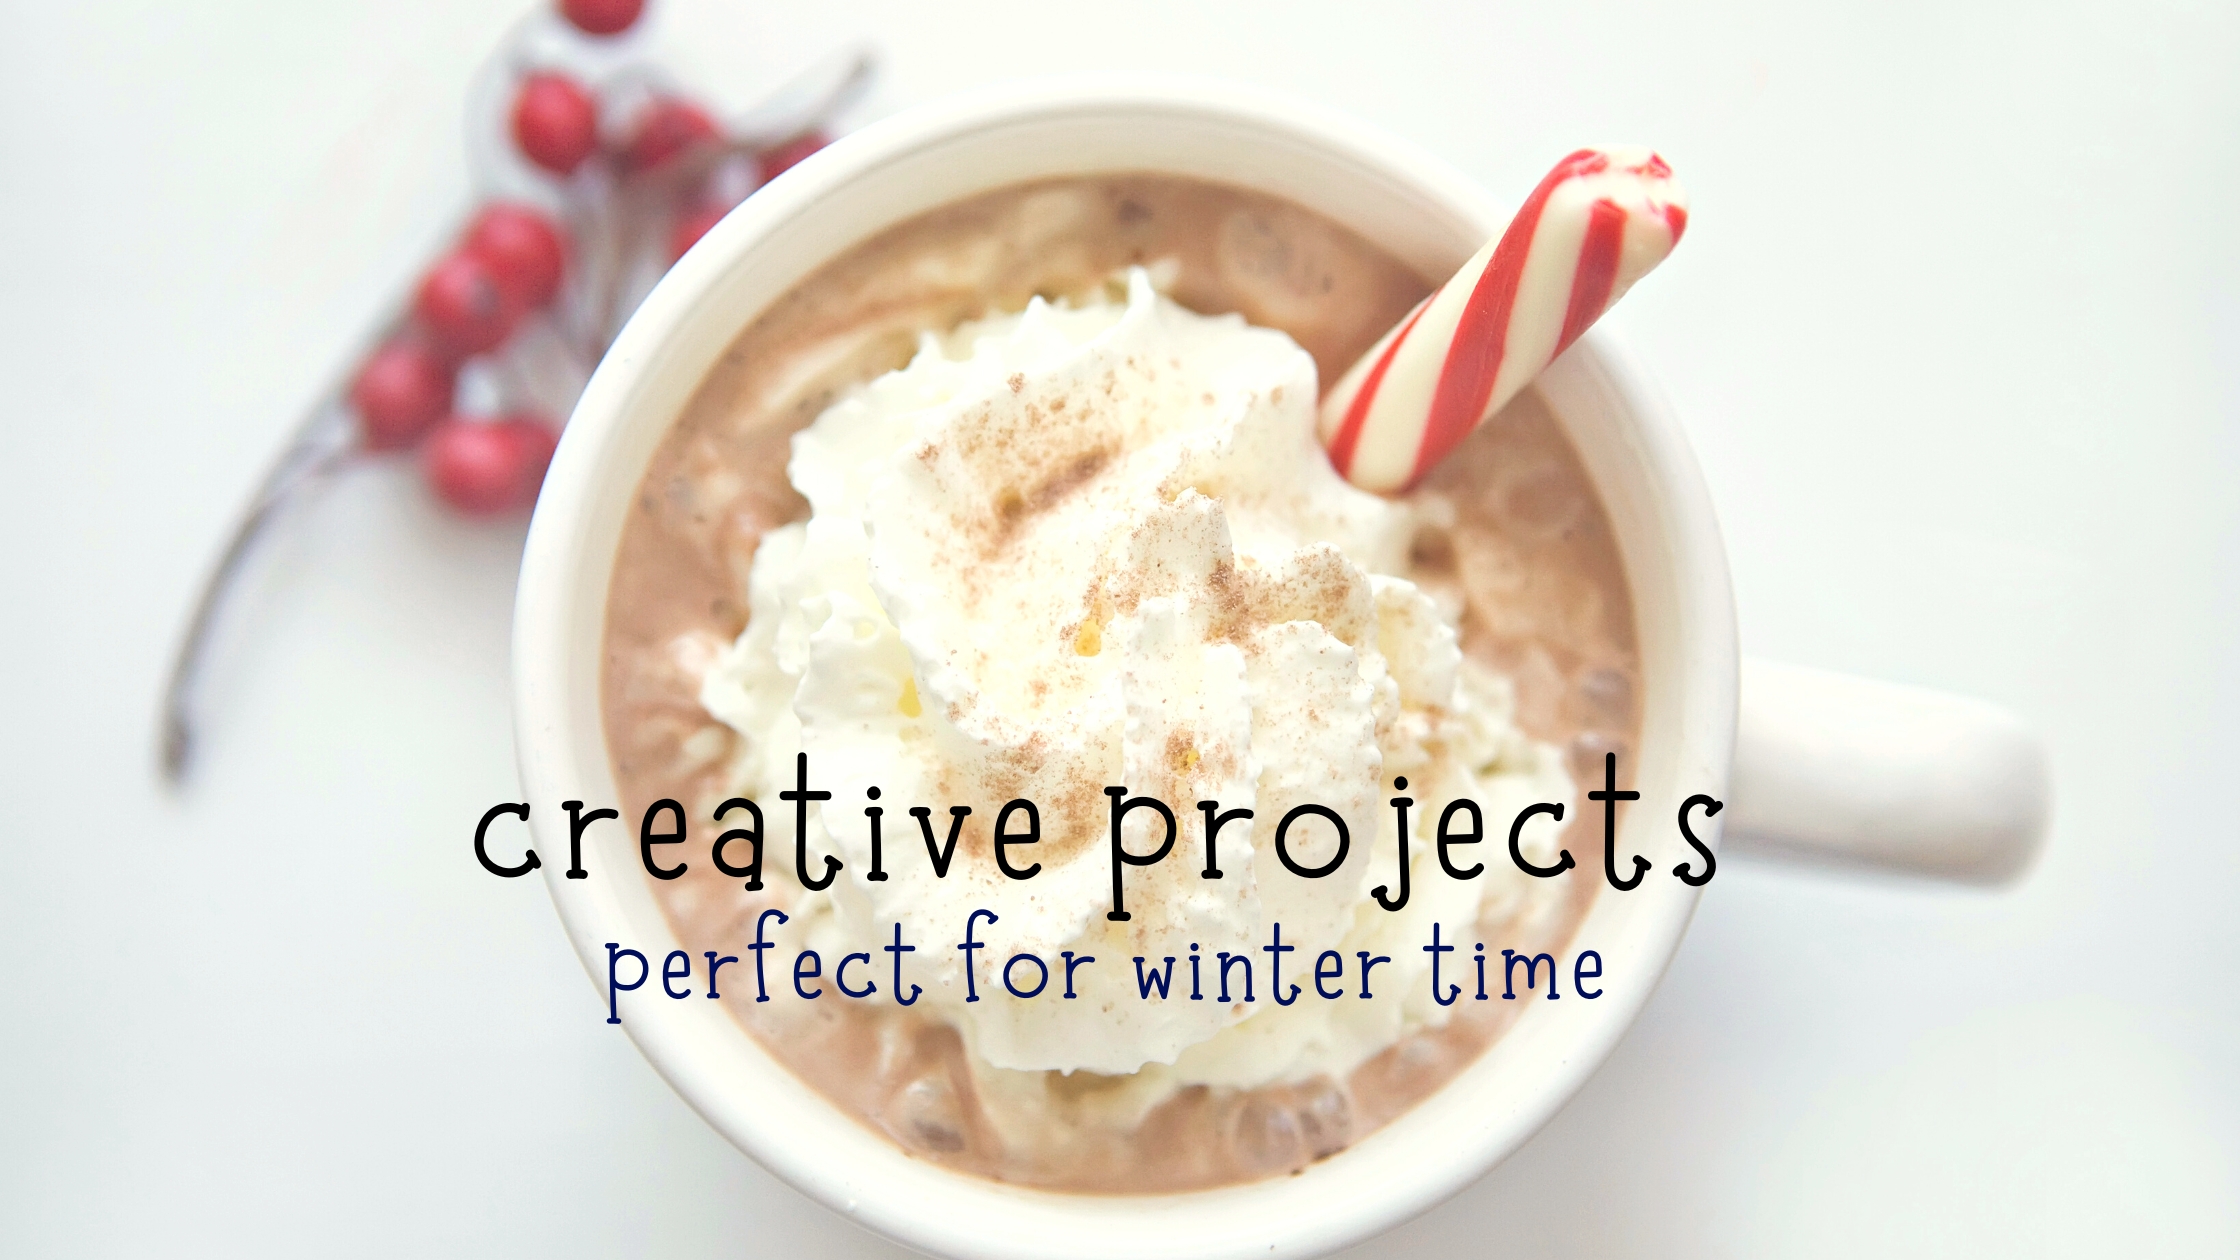 creative projects for winter time. creative projects, ideas for creative projects, creative projects for kids, creative projects for teens, creative projects for families